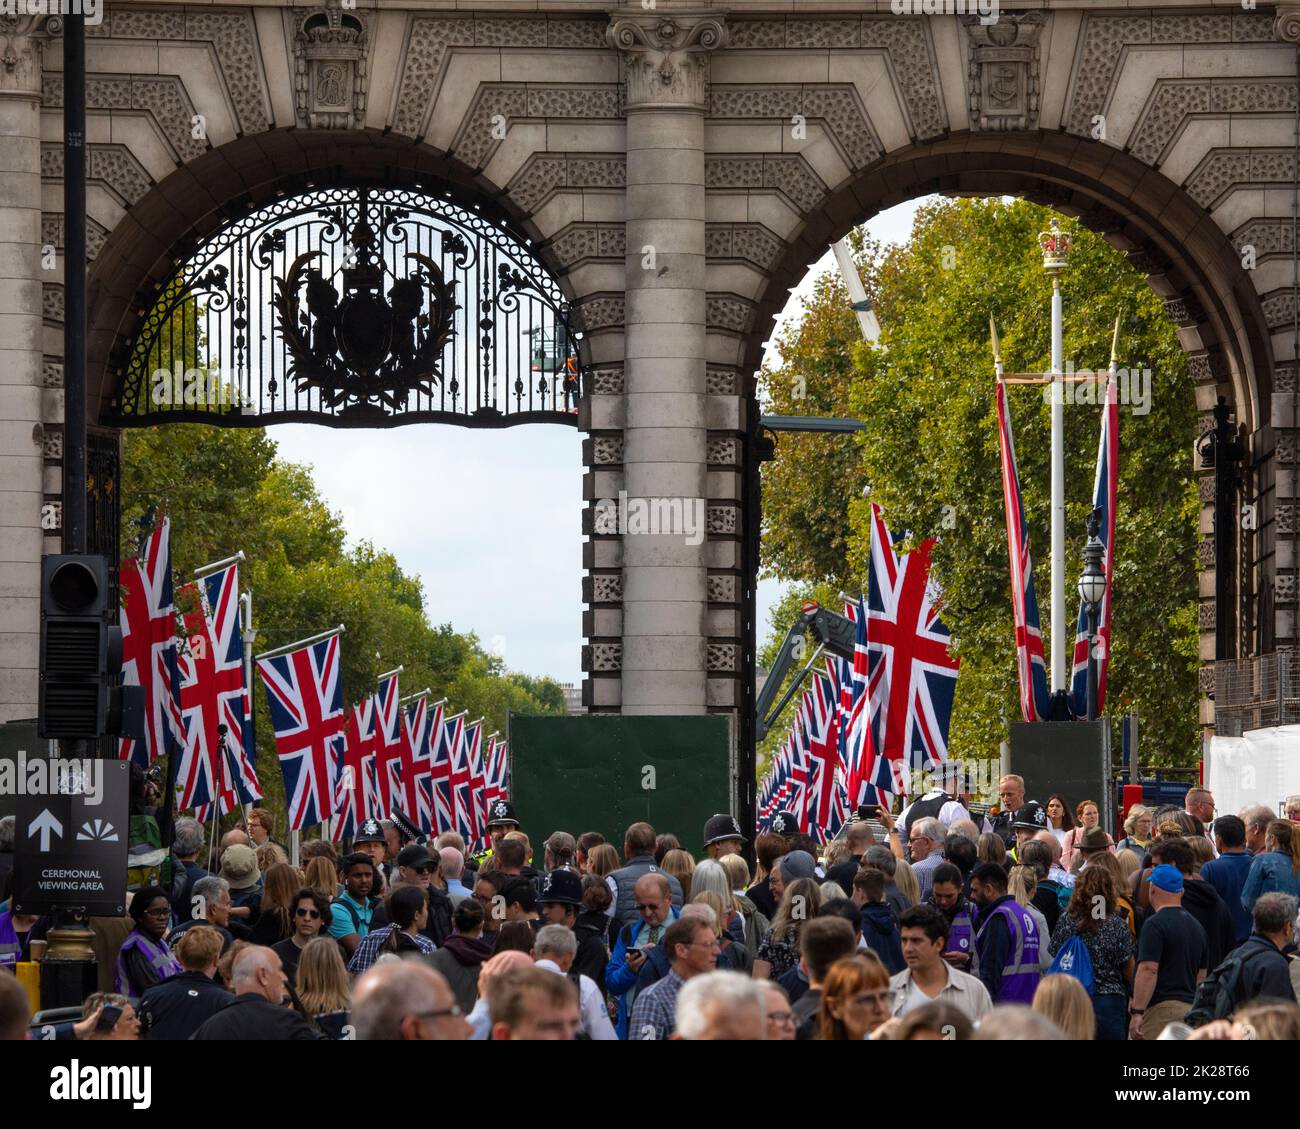 London, UK - September 14th 2022: Crowds gathering at Admiralty Arch in London, with The Mall in the background, pictured before the Queens Procession Stock Photo